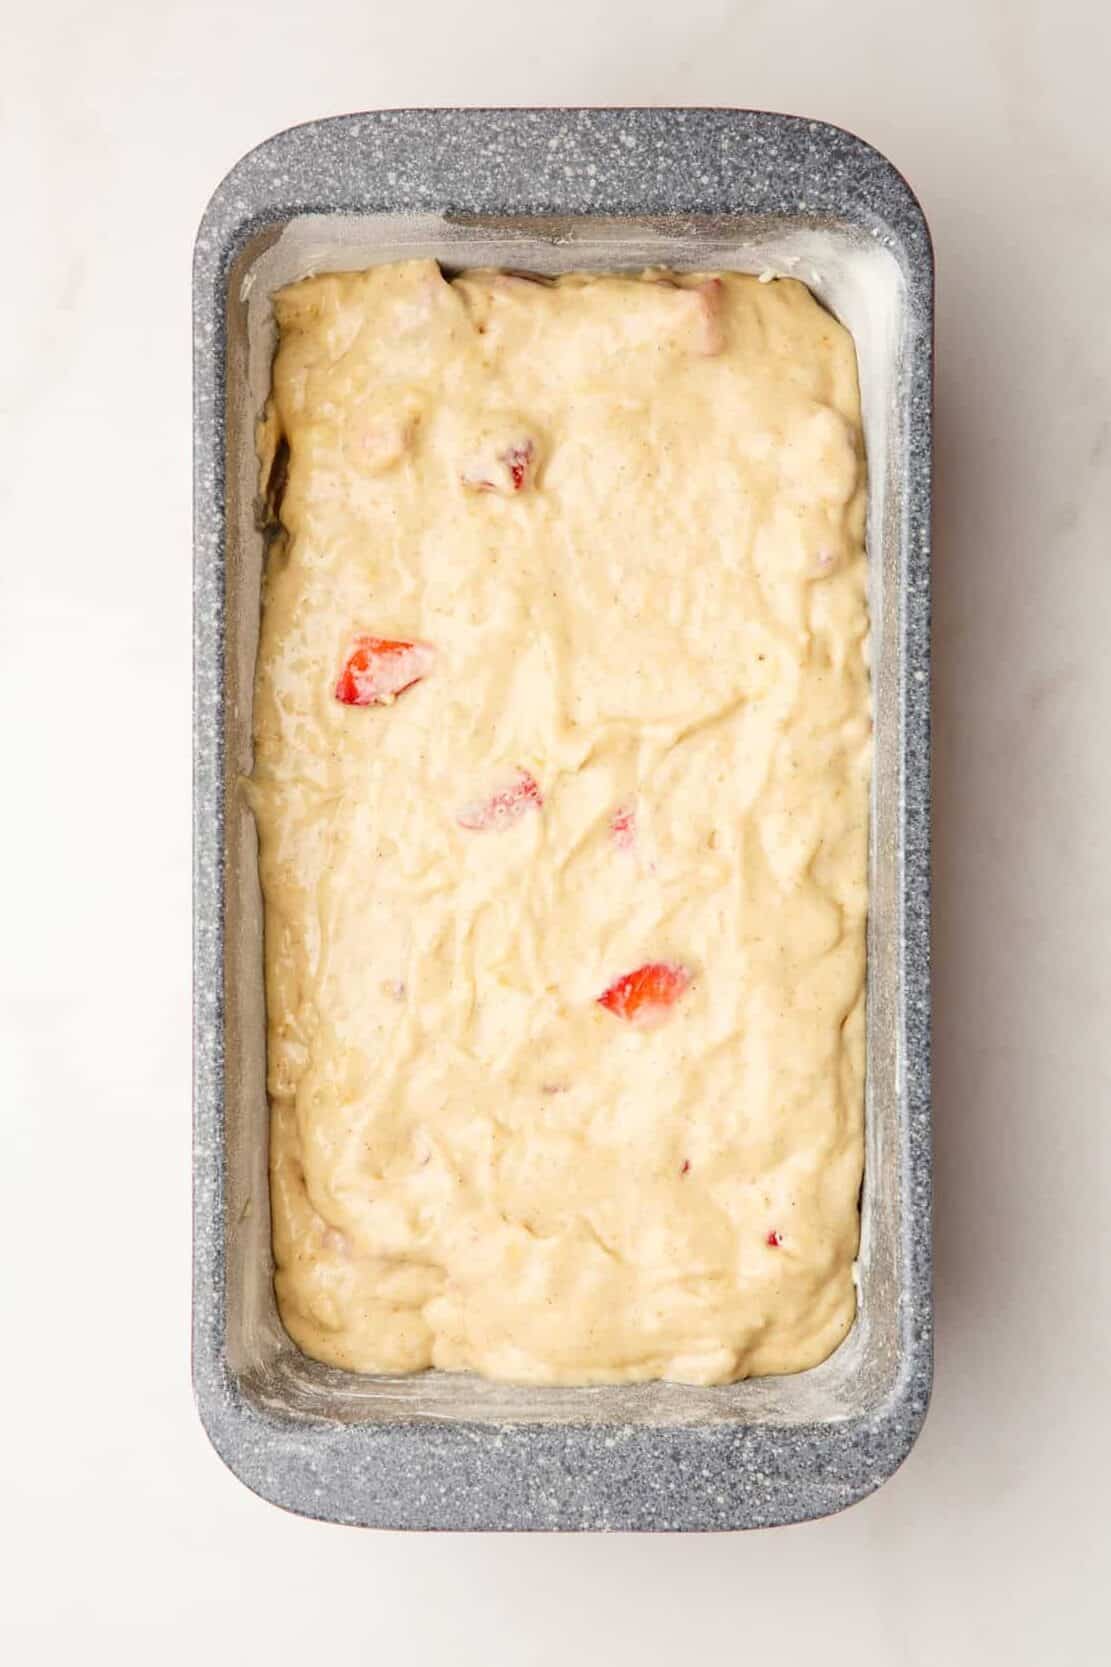 step 4 to make strawberry banana bread, pour batter into a prepared 9x13-inch loaf pan